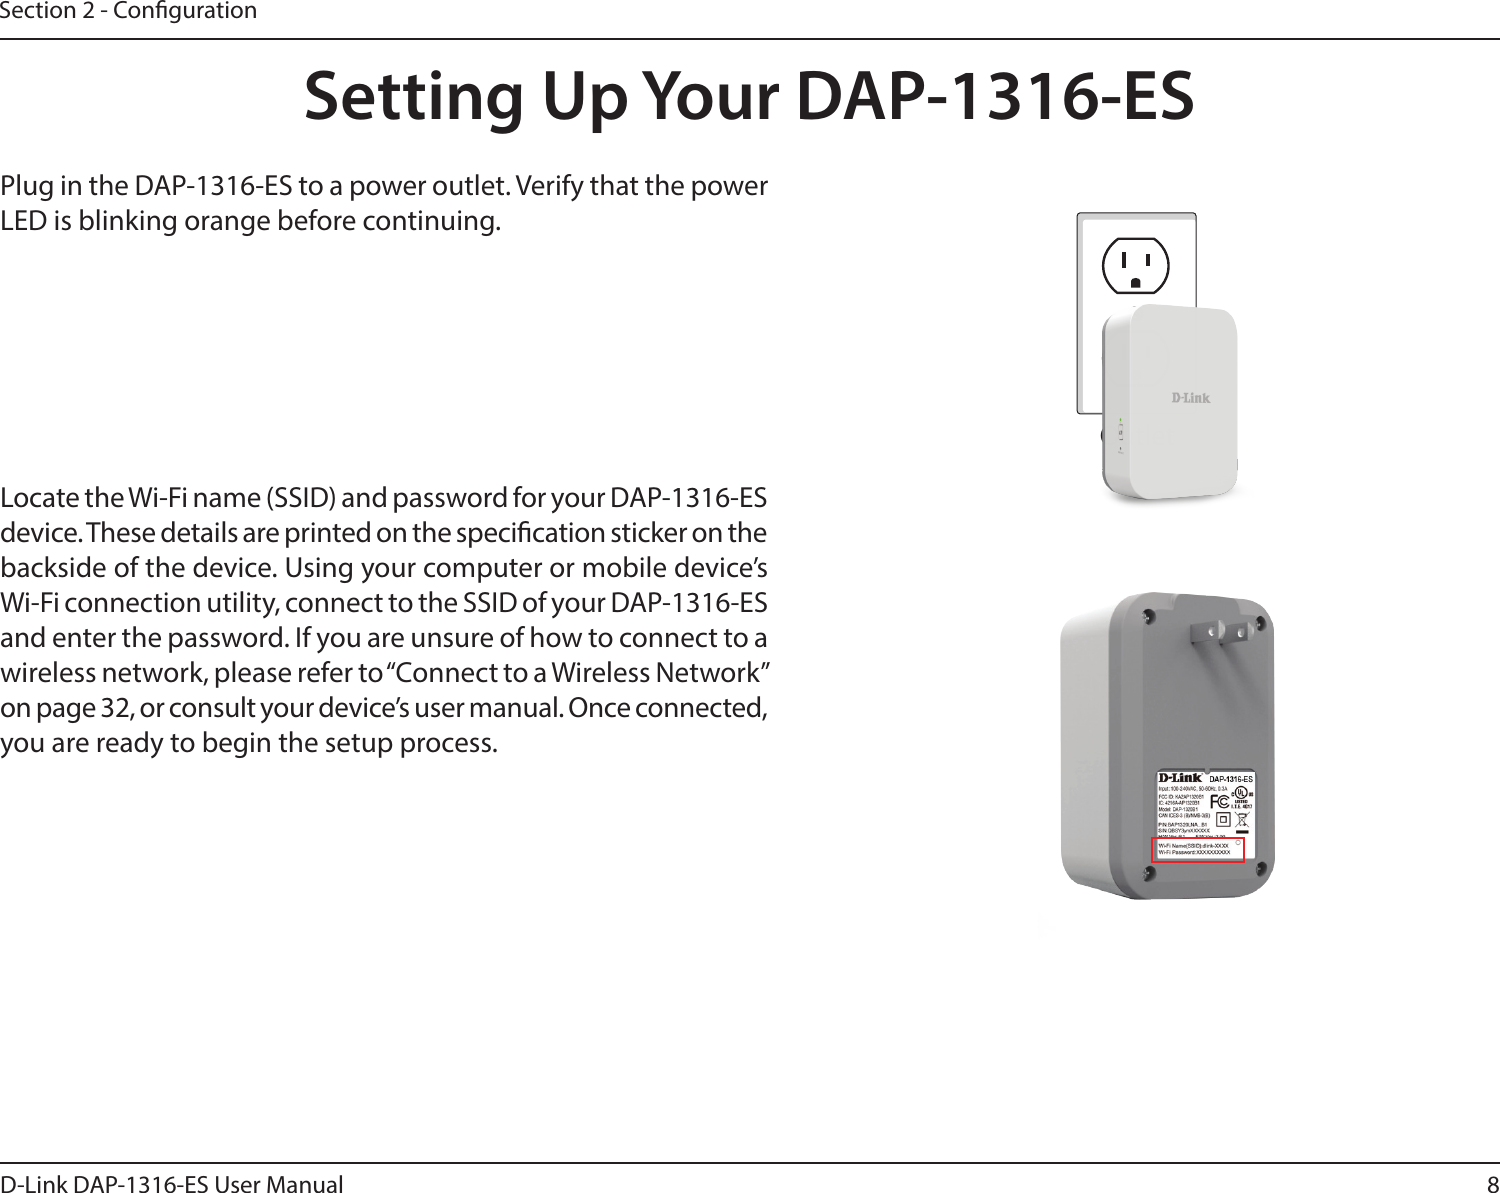 8D-Link DAP-1316-ES User ManualSection 2 - CongurationSetting Up Your DAP-1316-ESPlug in the DAP-1316-ES to a power outlet. Verify that the power LED is blinking orange before continuing.OutletEthernetLocate the Wi-Fi name (SSID) and password for your DAP-1316-ES device. These details are printed on the specication sticker on the backside of the device. Using your computer or mobile device’s Wi-Fi connection utility, connect to the SSID of your DAP-1316-ES and enter the password. If you are unsure of how to connect to a wireless network, please refer to “Connect to a Wireless Network” on page 32, or consult your device’s user manual. Once connected, you are ready to begin the setup process.